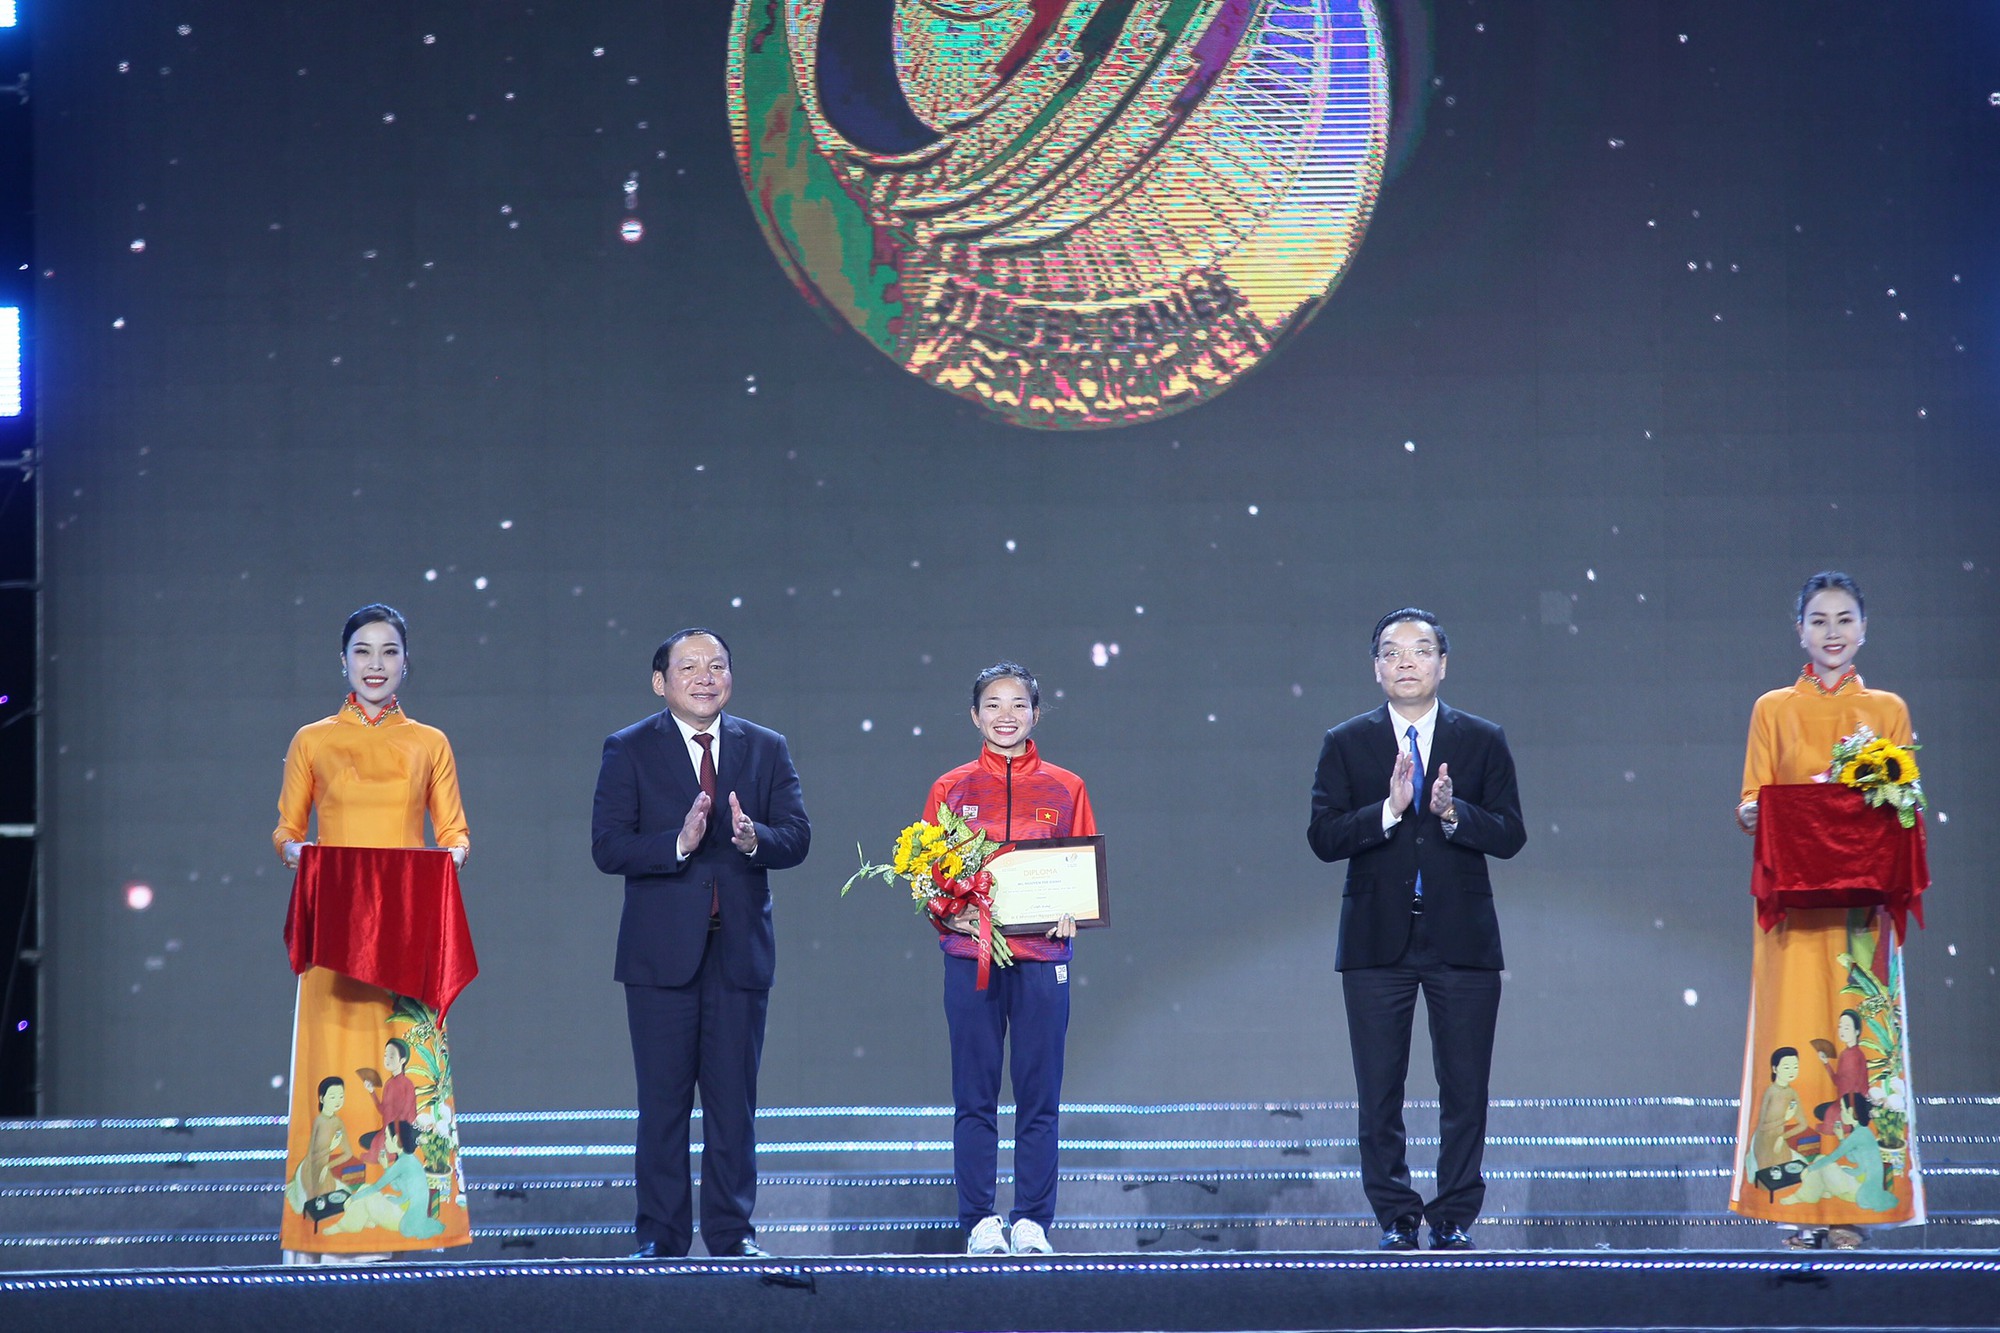 SEA Games 31 converges to shine - Photo 2.